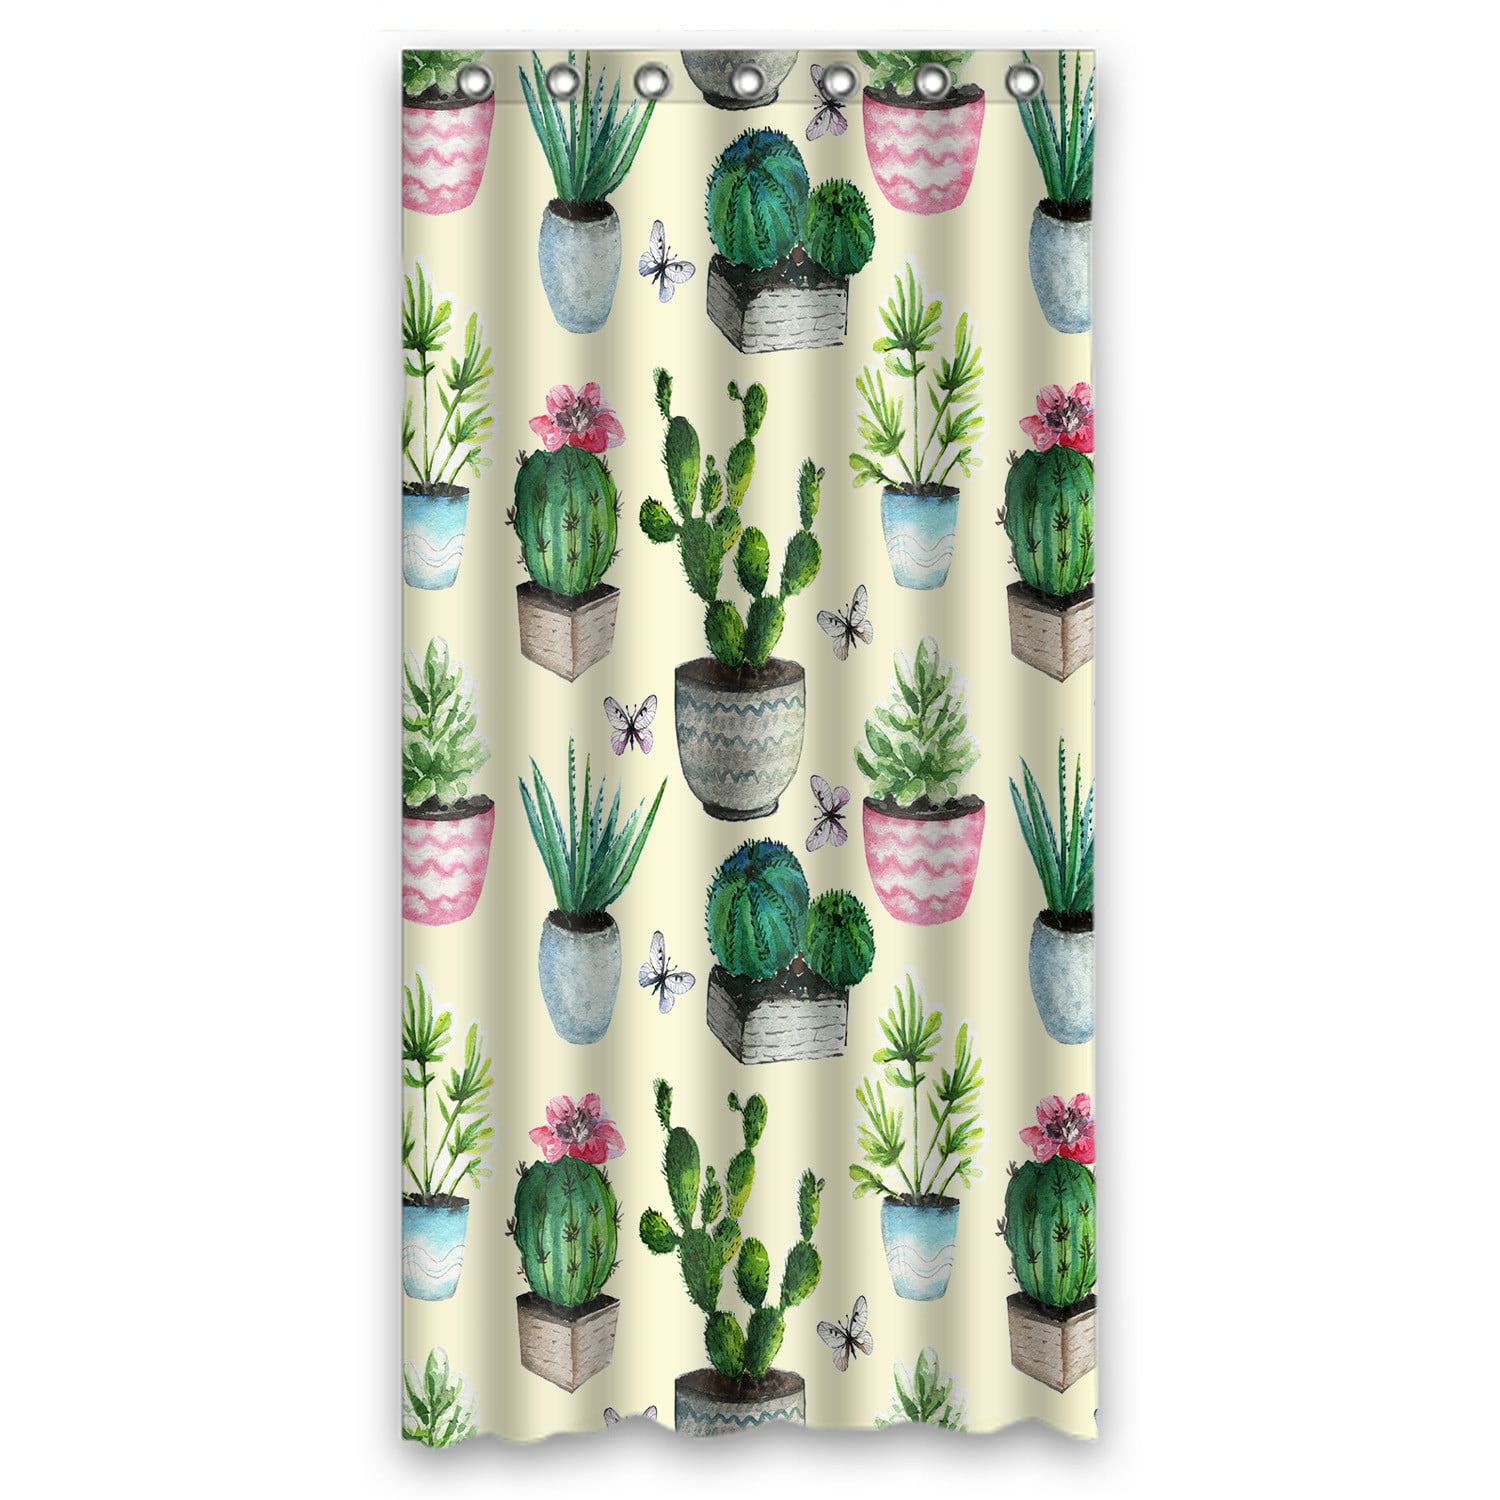 Watercolor Cactus Flower and Chameleon Bathroom Fabric Shower Curtain Set 71Inch 